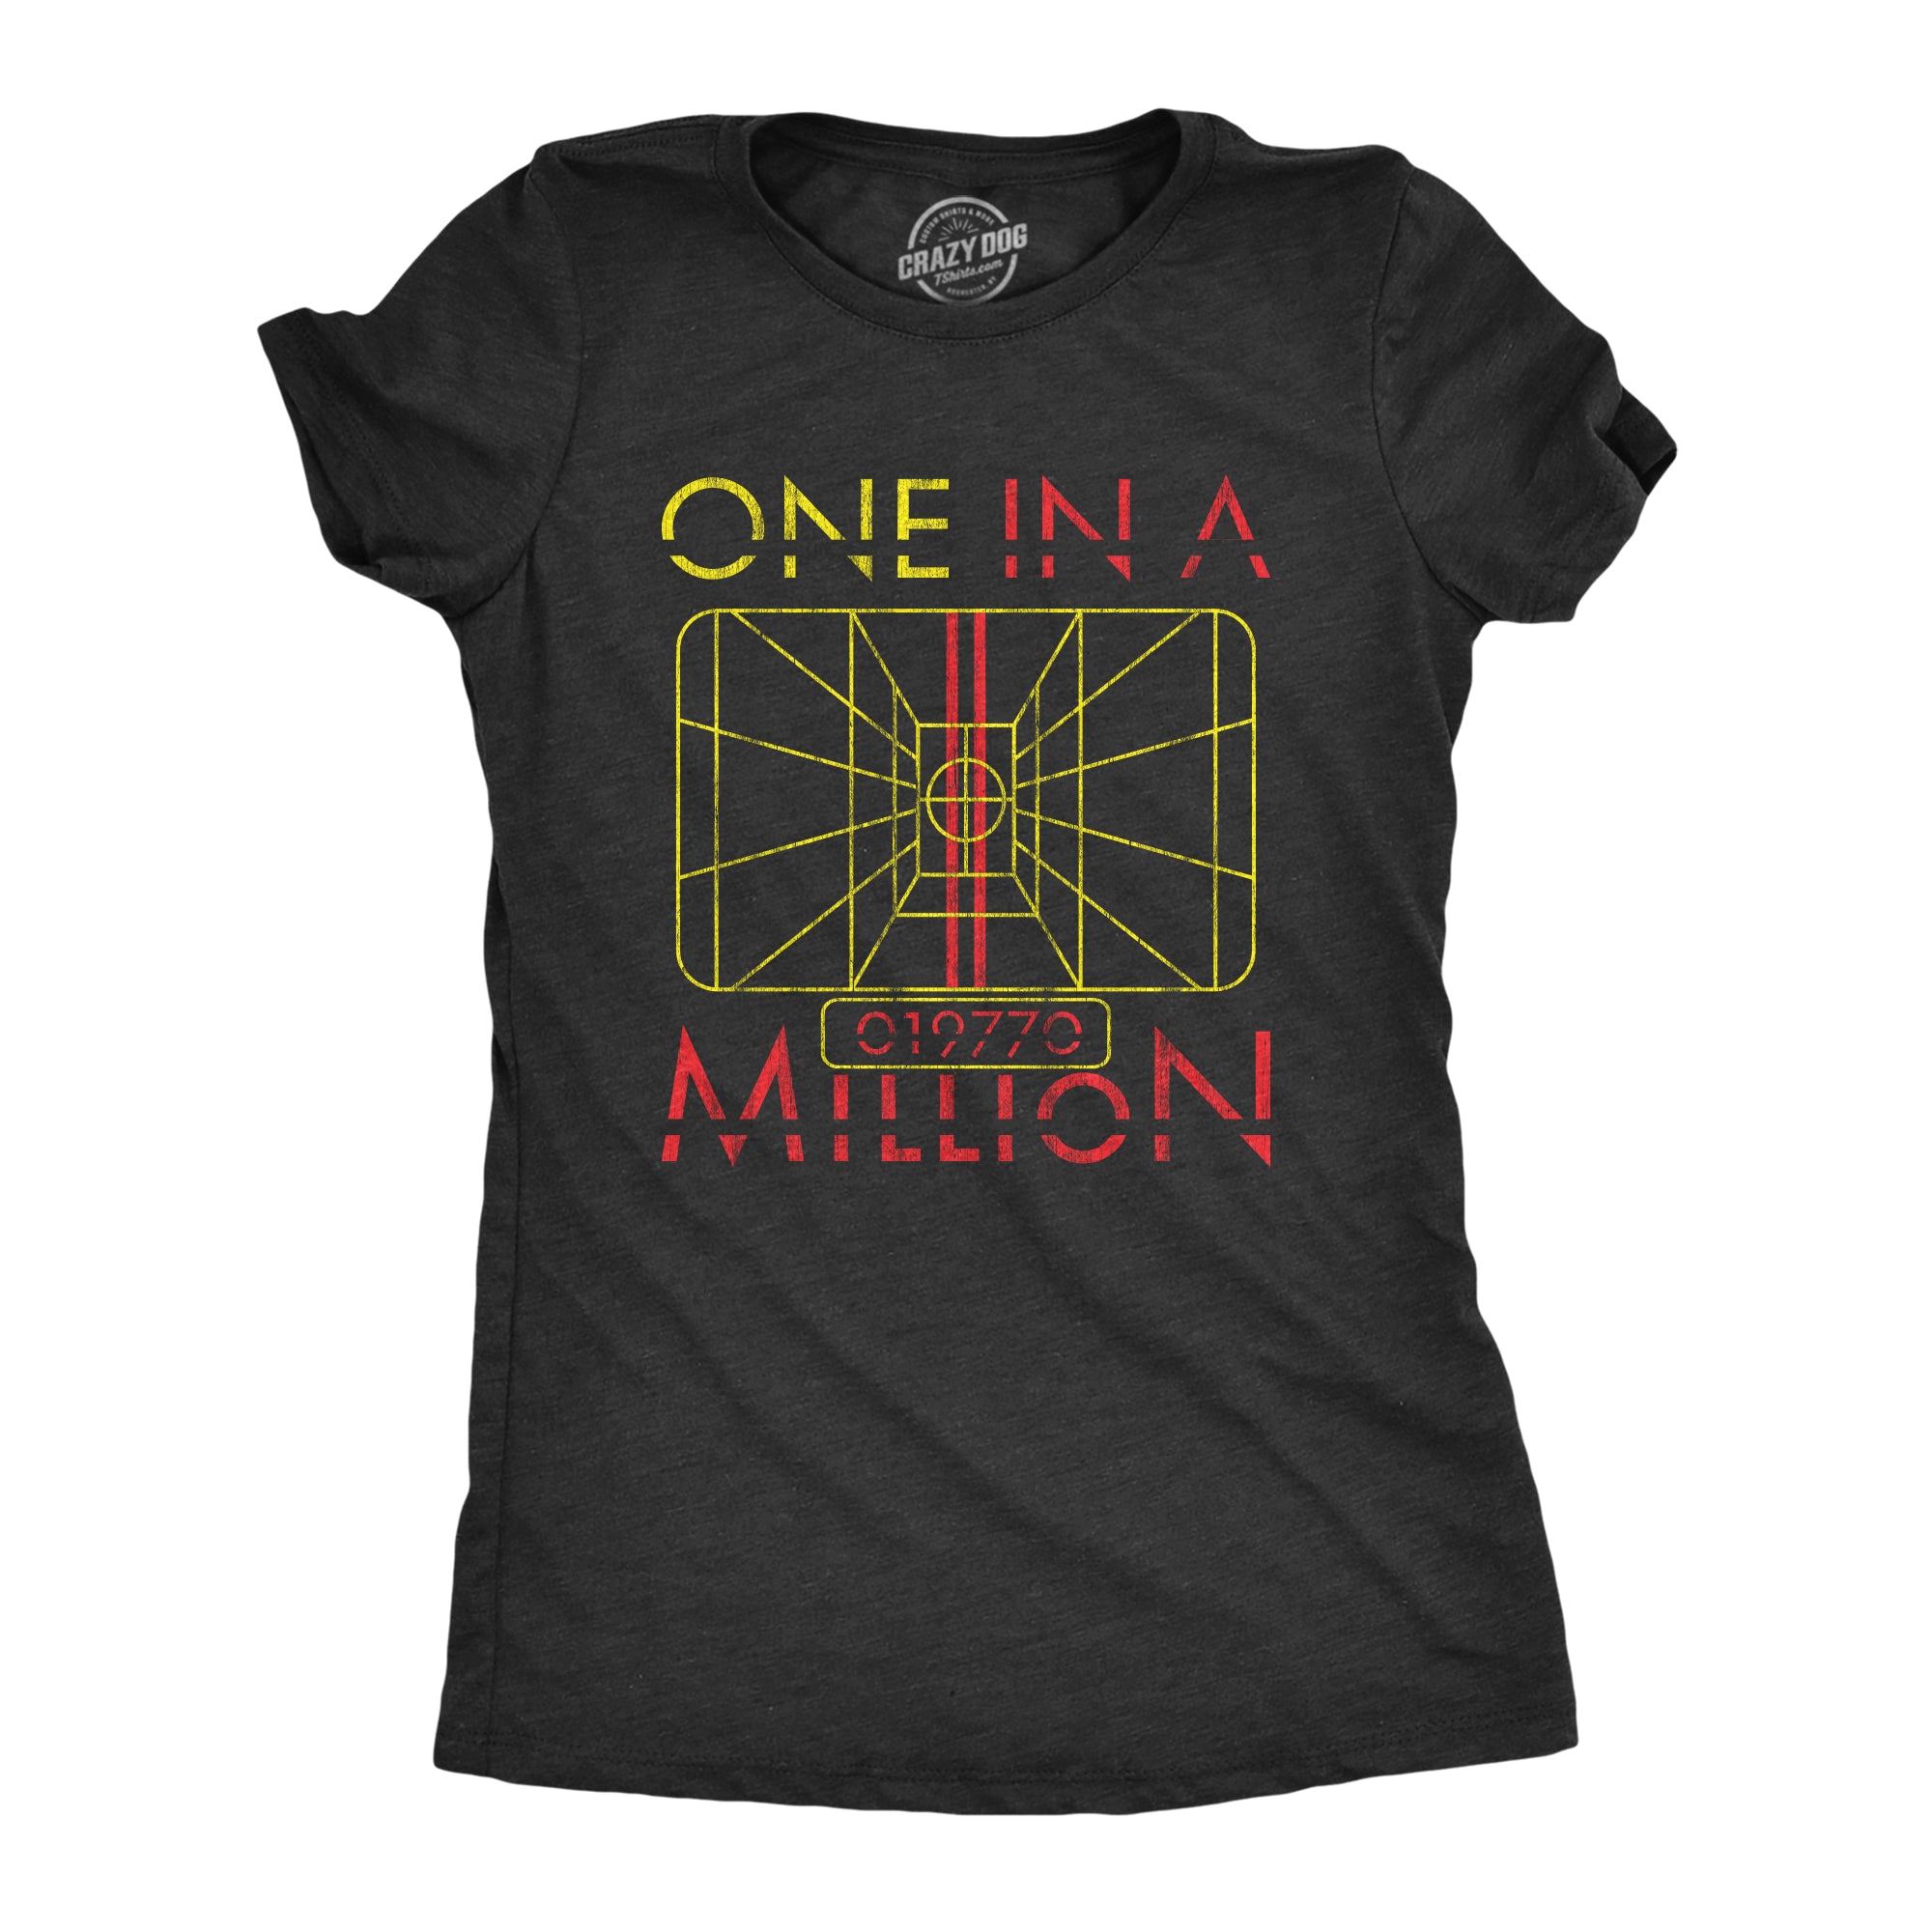 Funny Heather Black One In A Million Womens T Shirt Nerdy TV & Movies Nerdy Tee